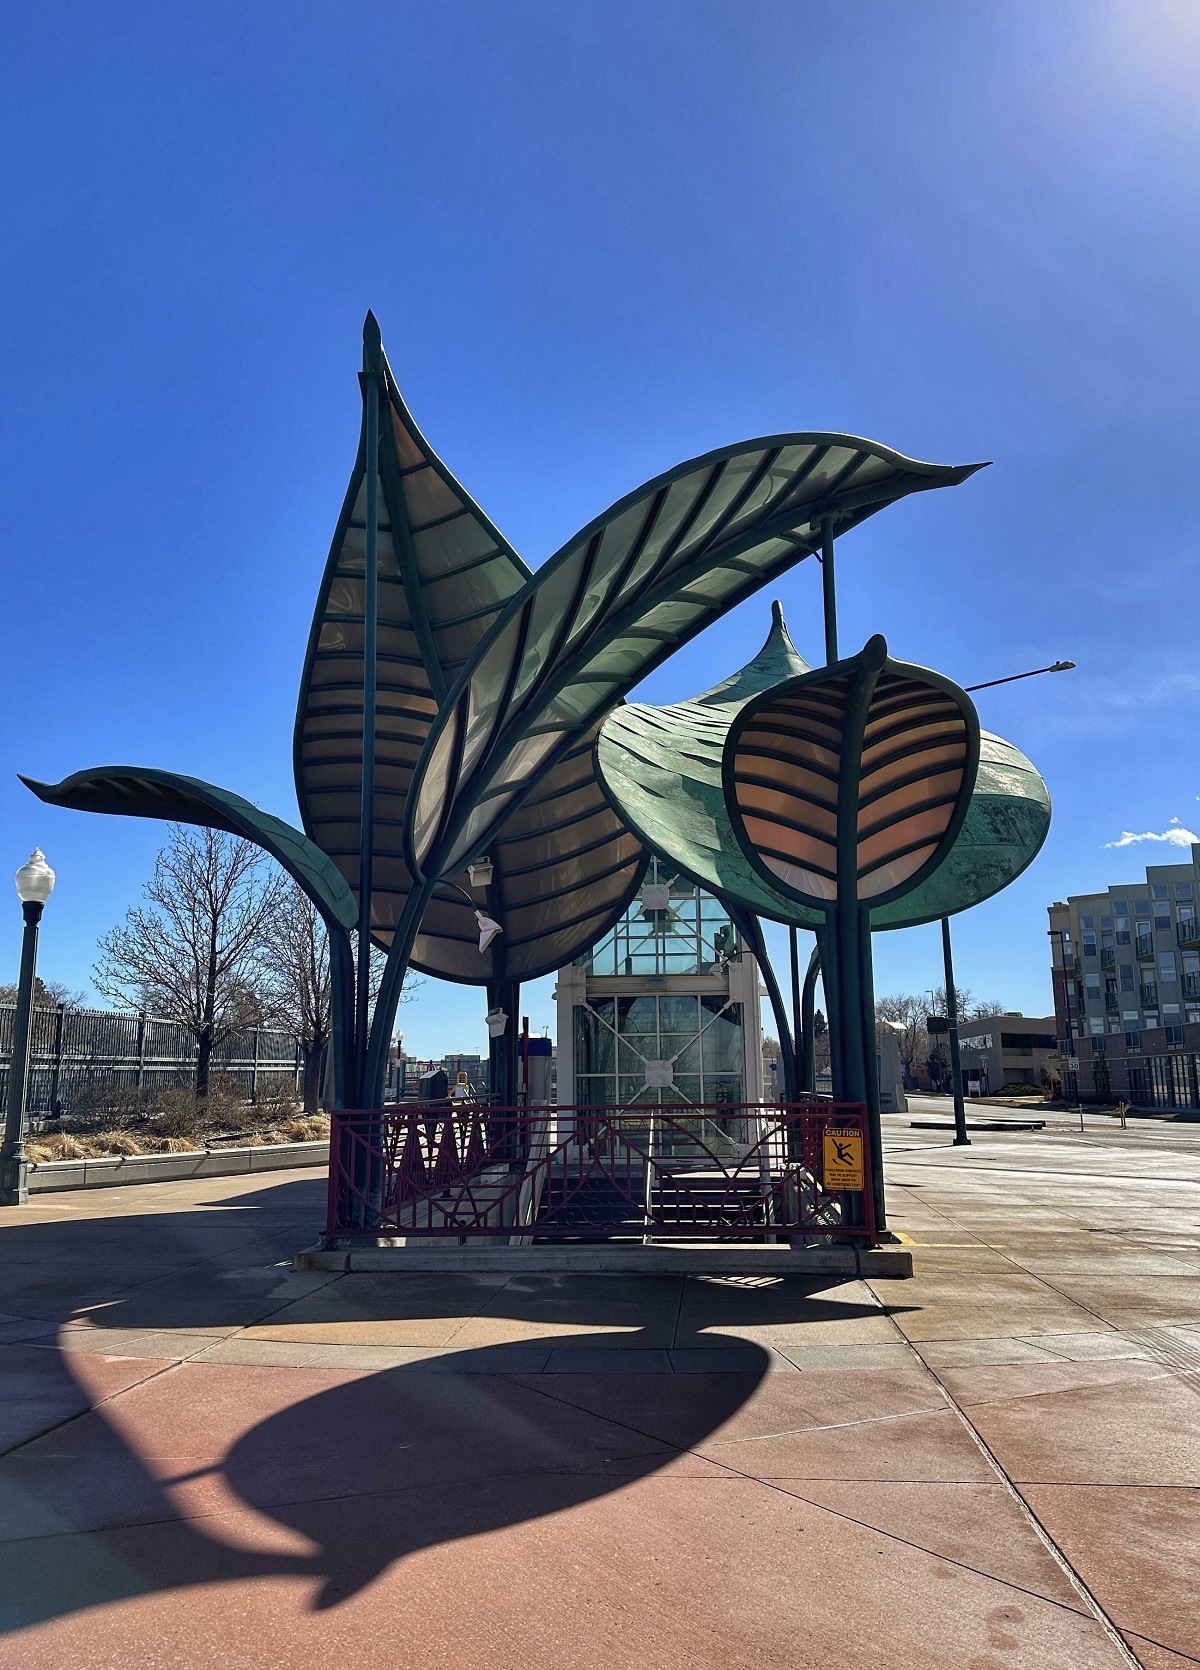 Someone Recommended That I Post This Denver Light Rail Station Entrance On Here